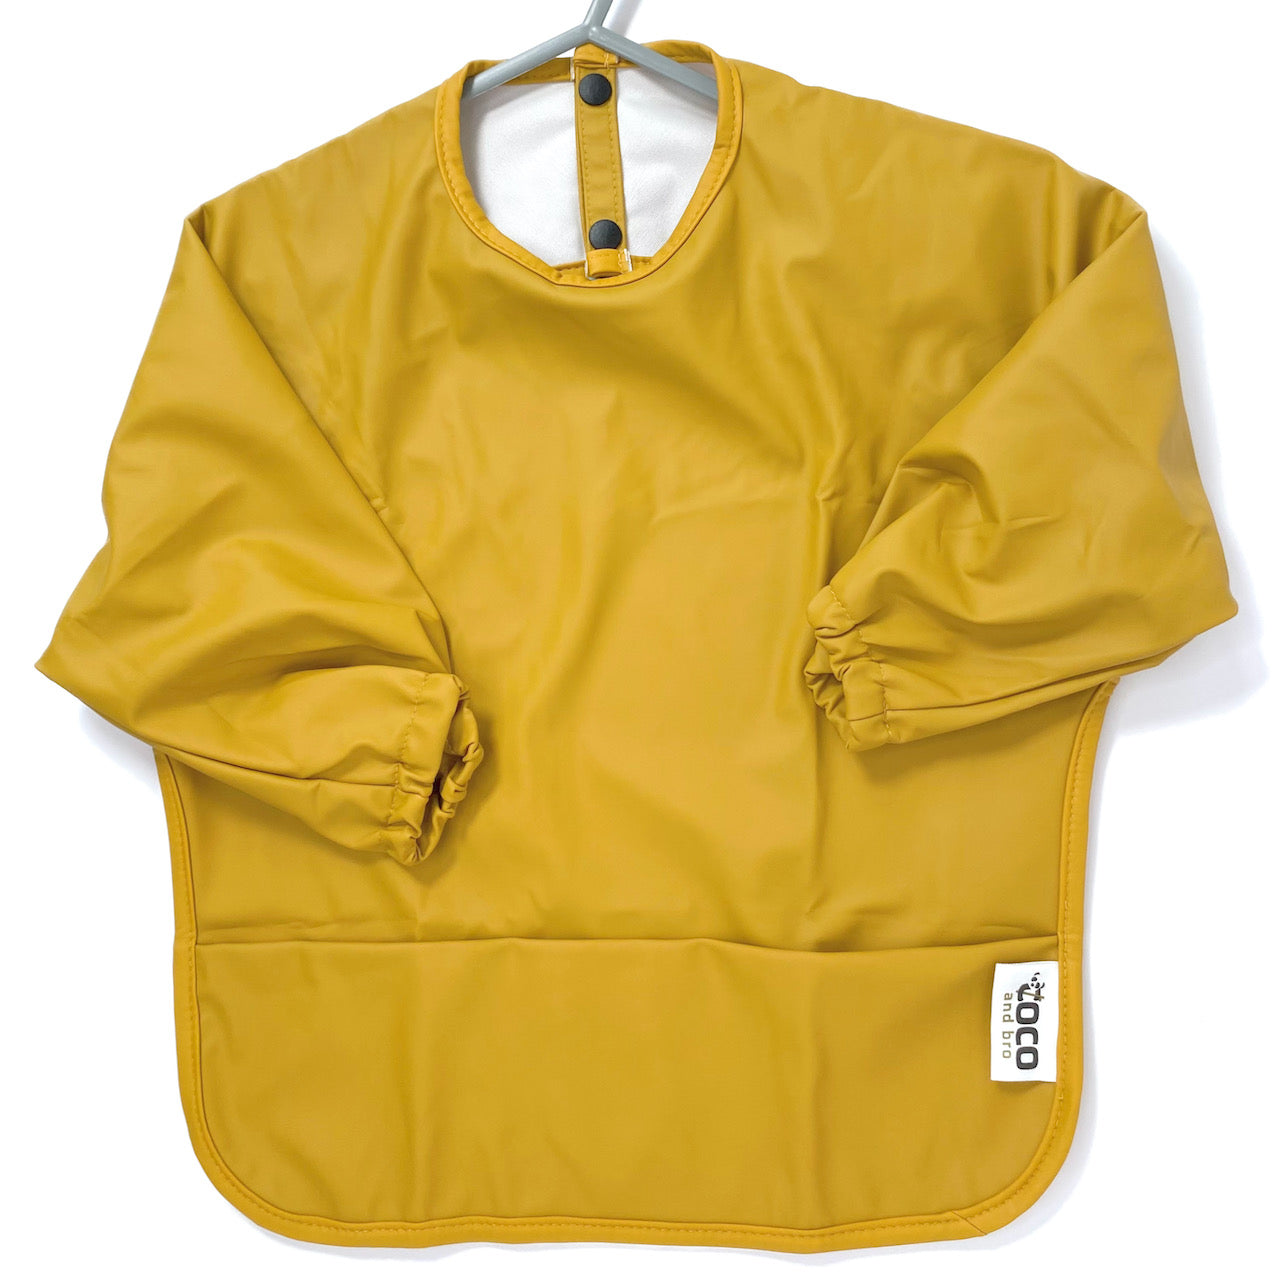 Long-sleeve kids apron in butterscotch yellow colour, showing front view.